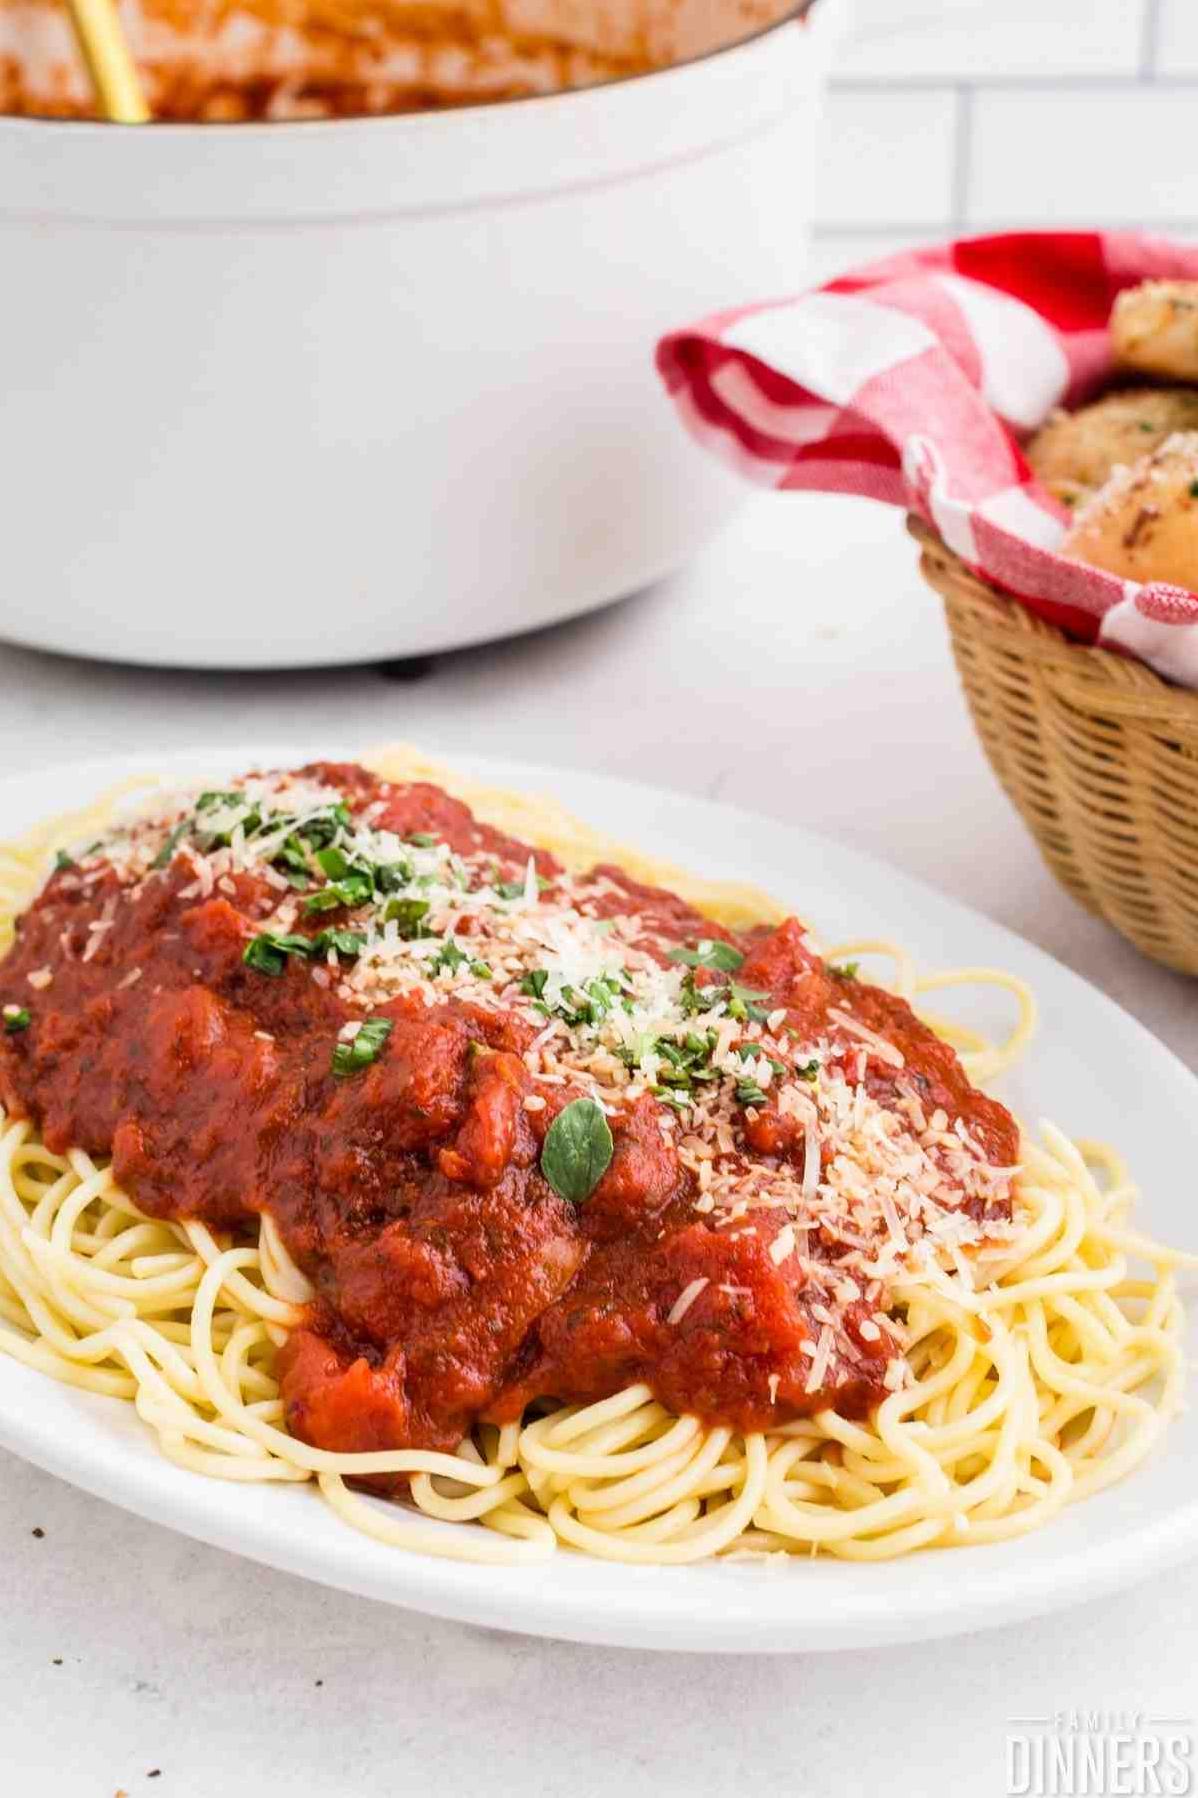  The rich flavor of this red wine tomato sauce is perfect for a special dinner with friends.